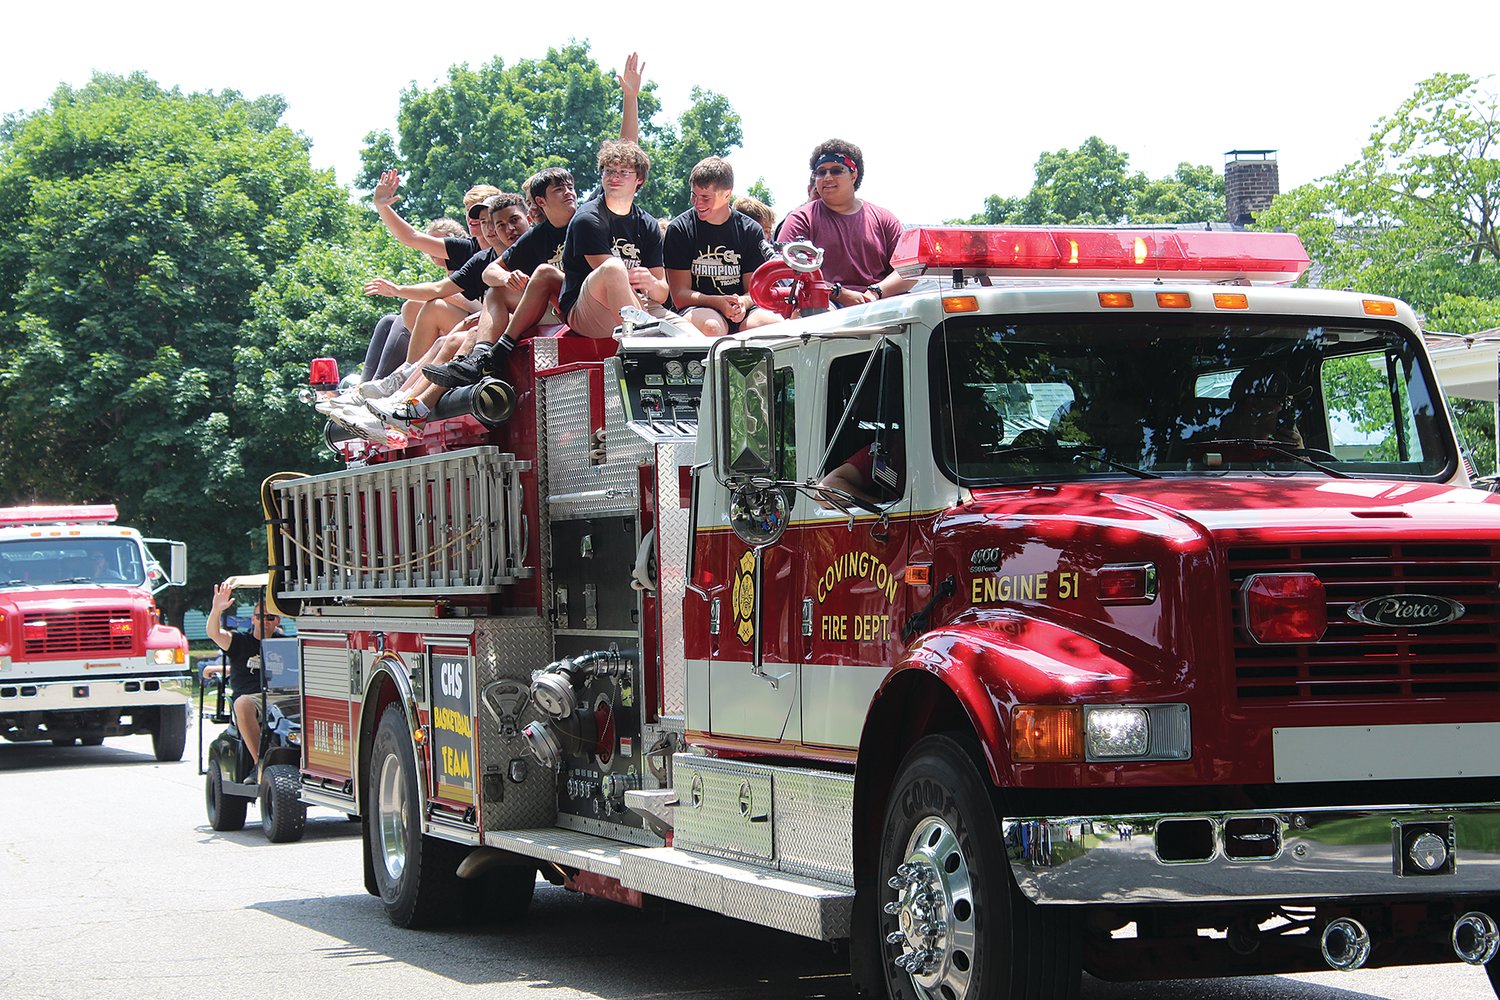 Members of the Covington High School boys basketball team served as parade grand marshals on Saturday afternoon.